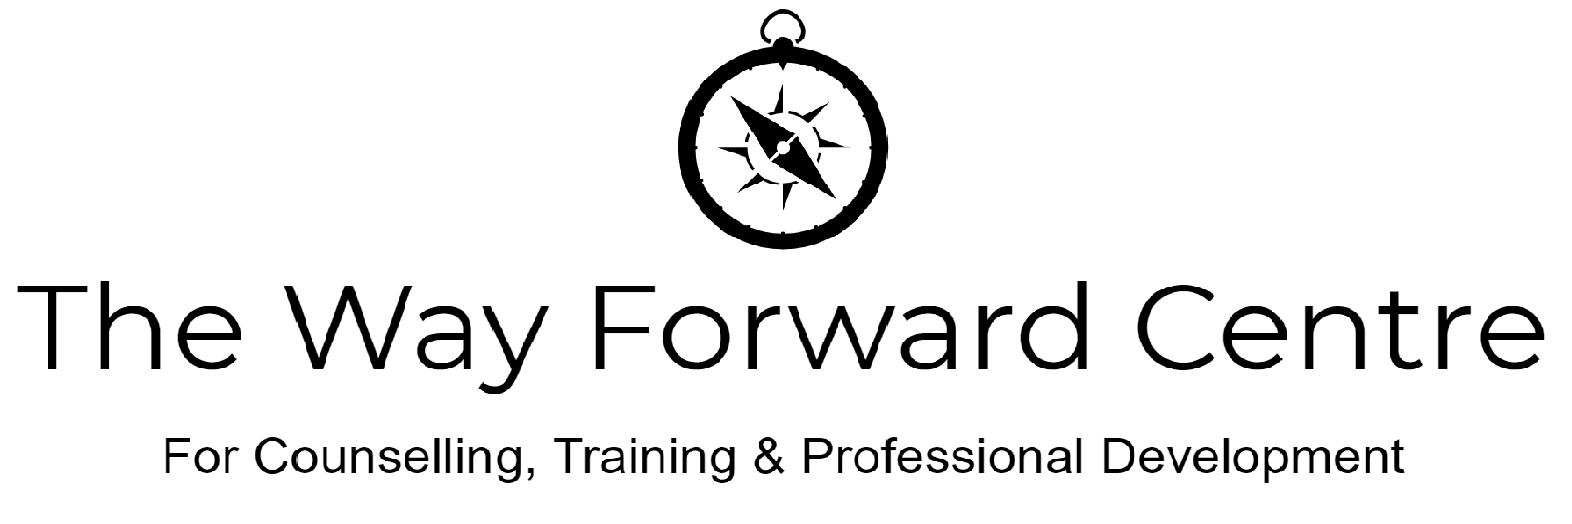 The Way Forward Centre for Counselling, Training & Professional Development